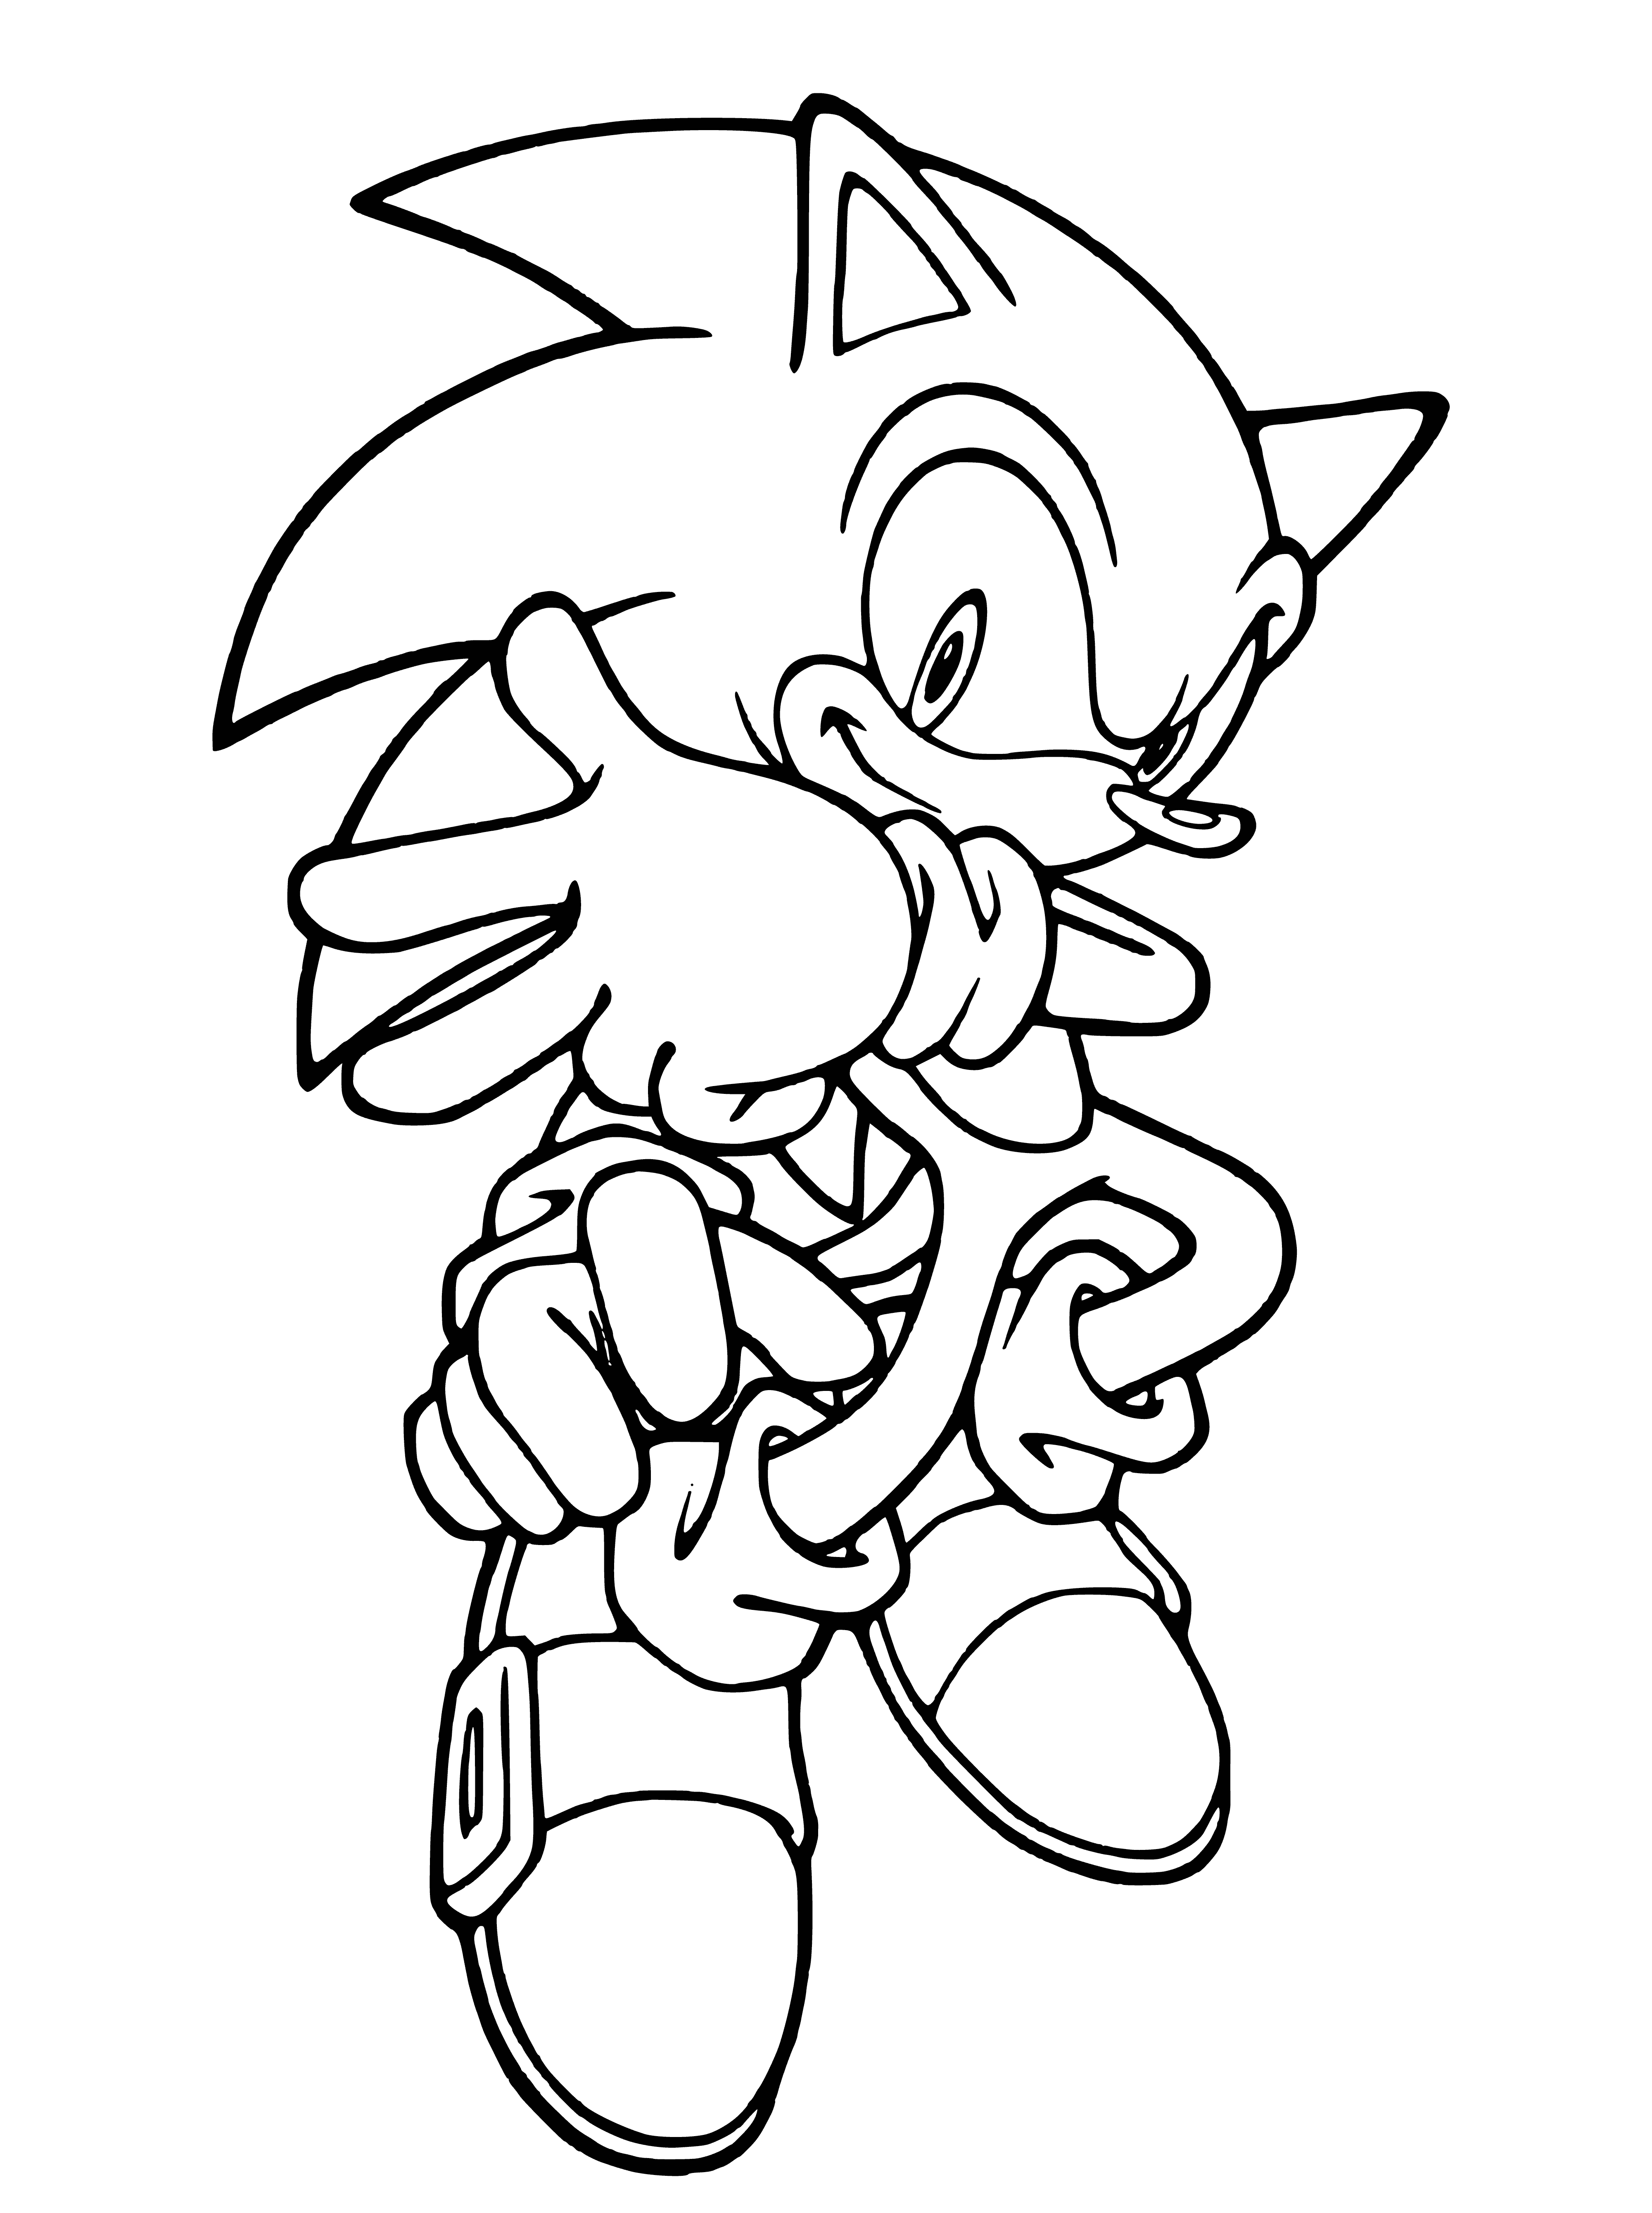 coloring page: Sonic is Sega's supersonic blue hedgehog mascot, created by Naoto Ohshima. He's the protagonist of the Sonic the Hedgehog series, known for his super speed.